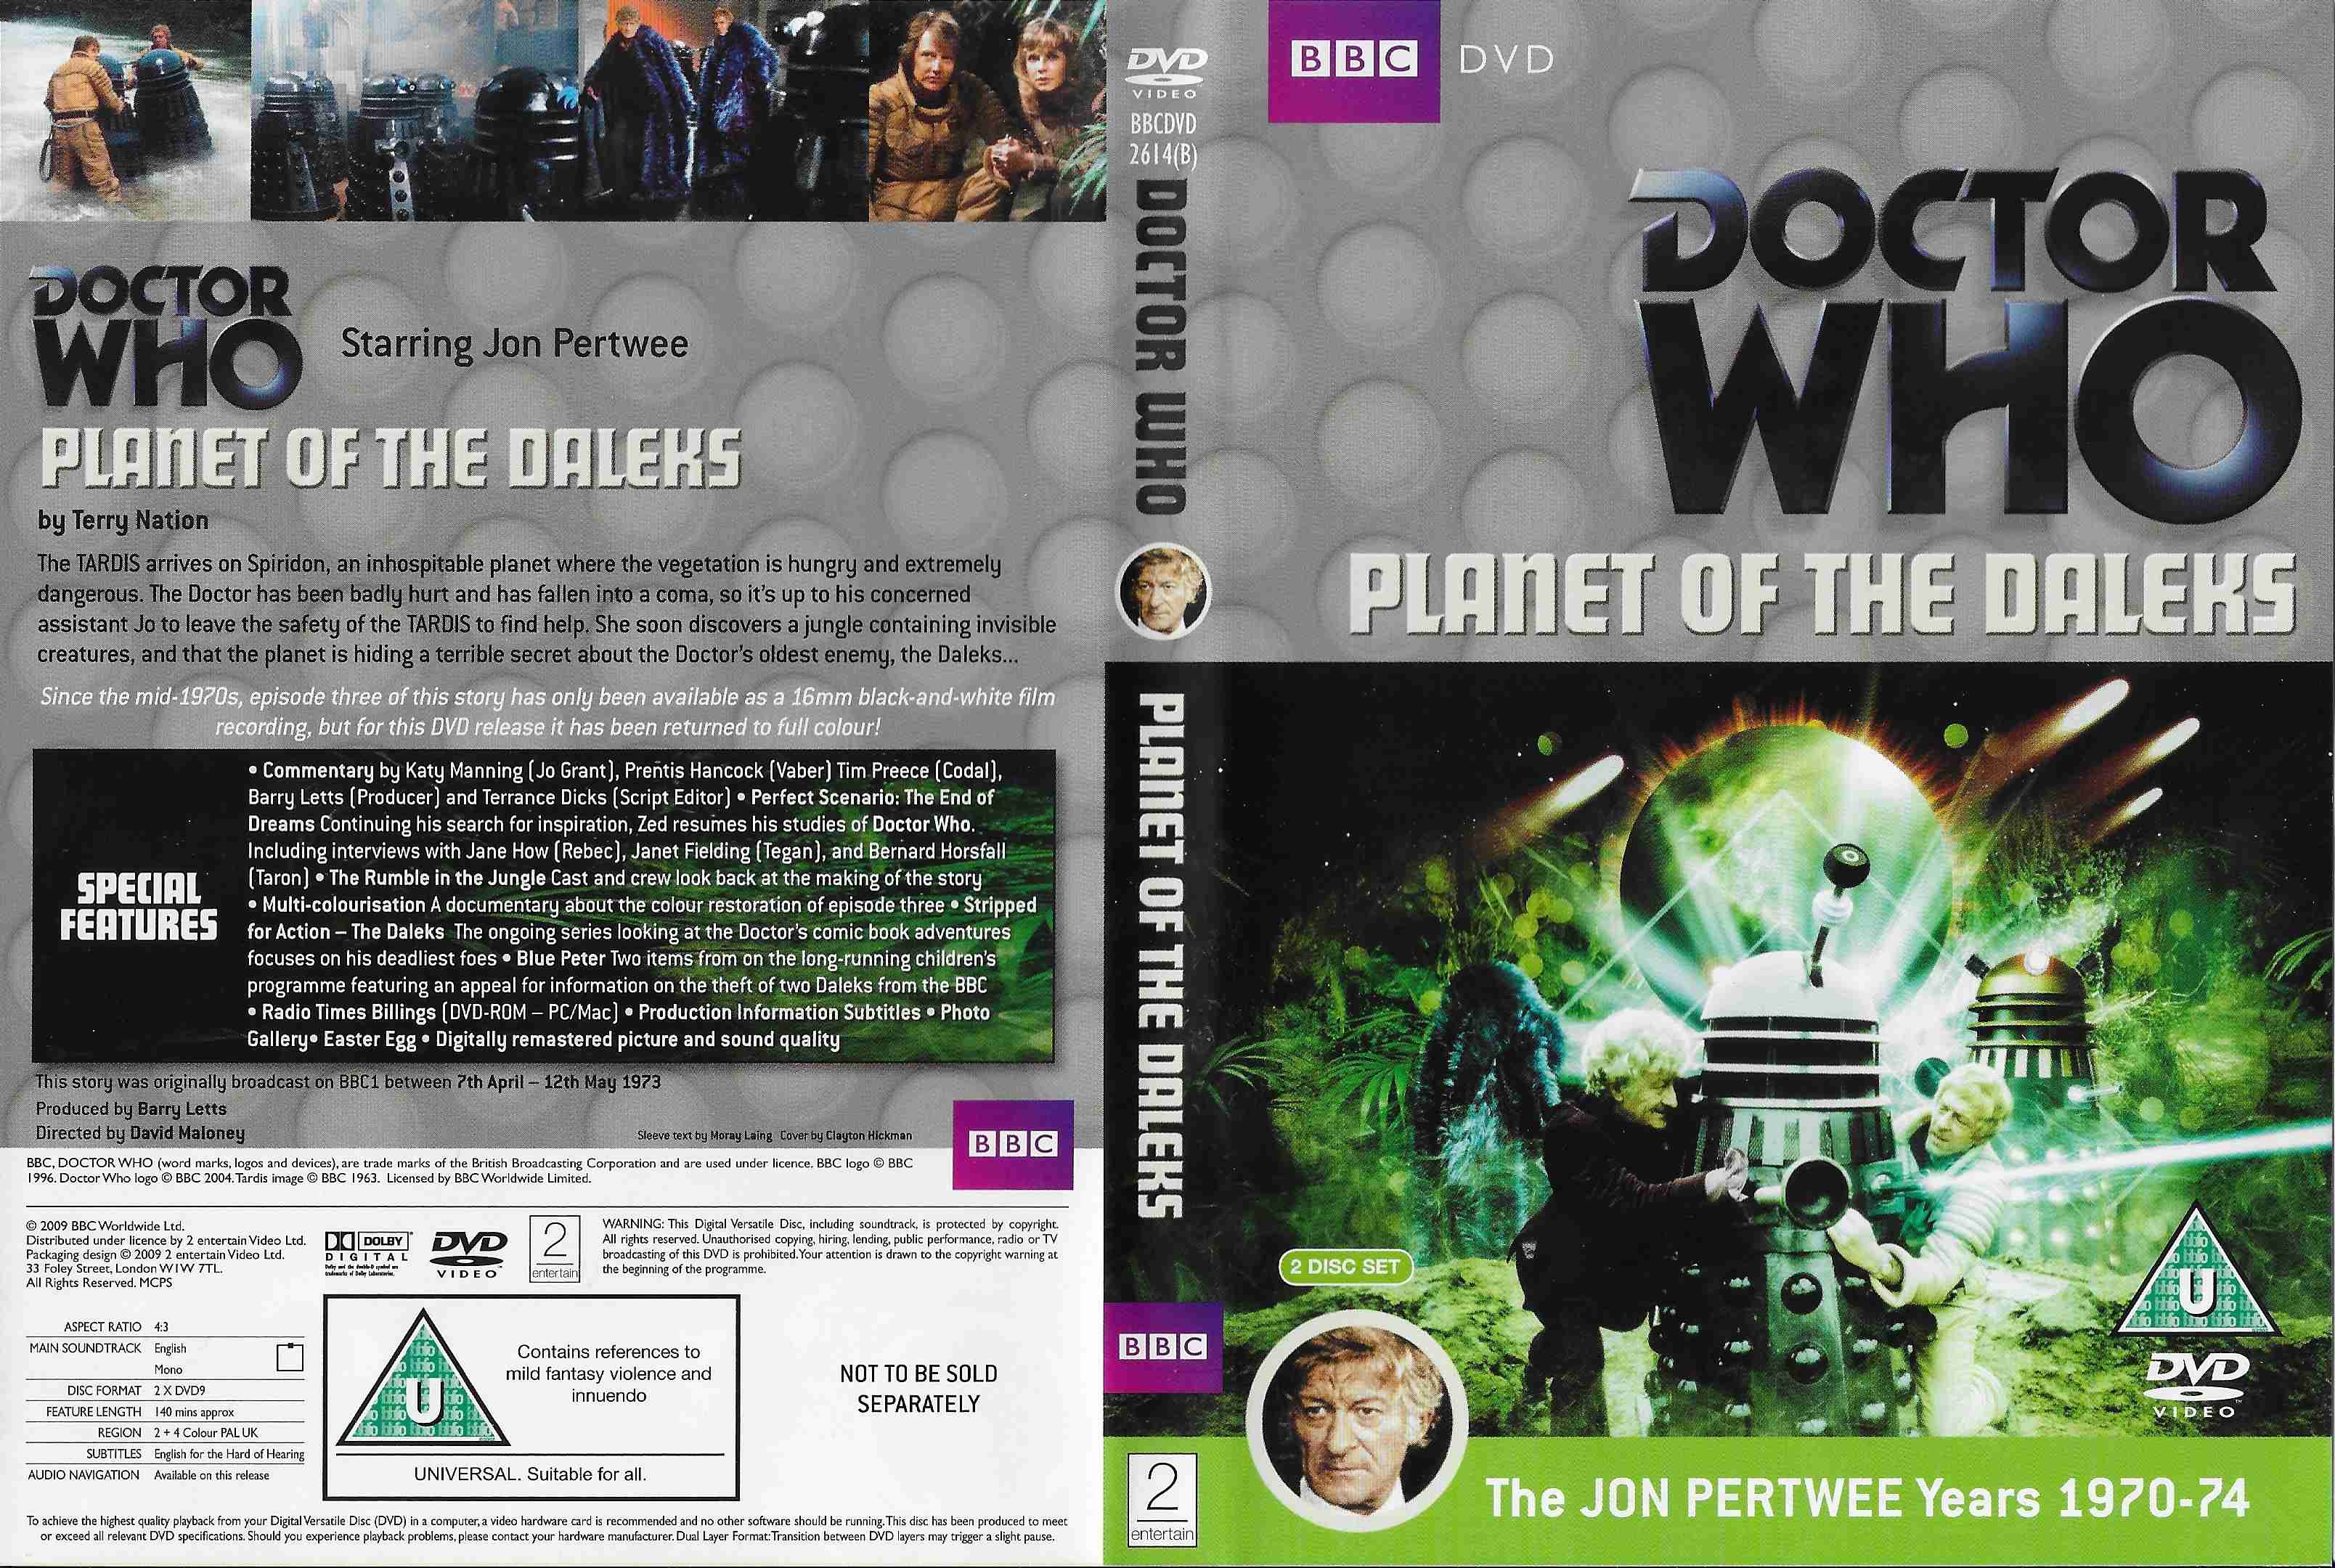 Picture of BBCDVD 2614B Doctor Who - Planet of the Daleks by artist Terry Nation from the BBC records and Tapes library